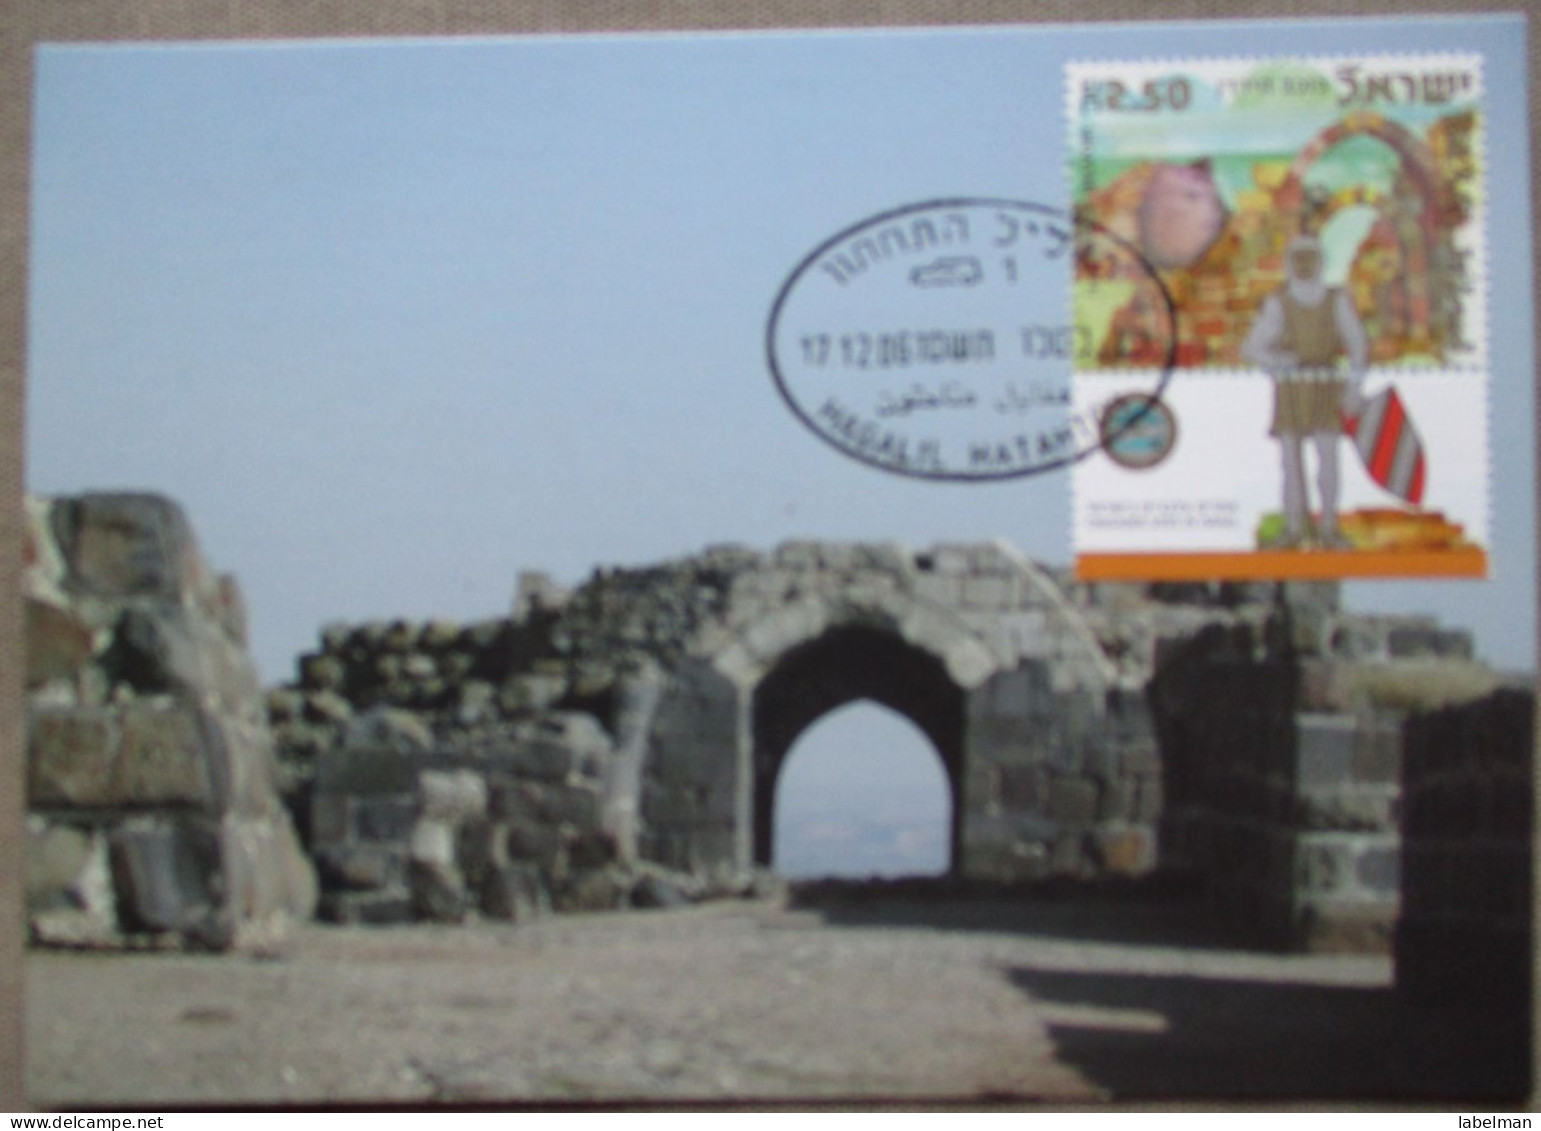 ISRAEL 2006 MAXIMUM CARD POSTCARD BELVOIR FORT GALILEE FIRST DAY OF ISSUE CARTOLINA CARTE POSTALE POSTKARTE CARTOLINA - Cartes-maximum